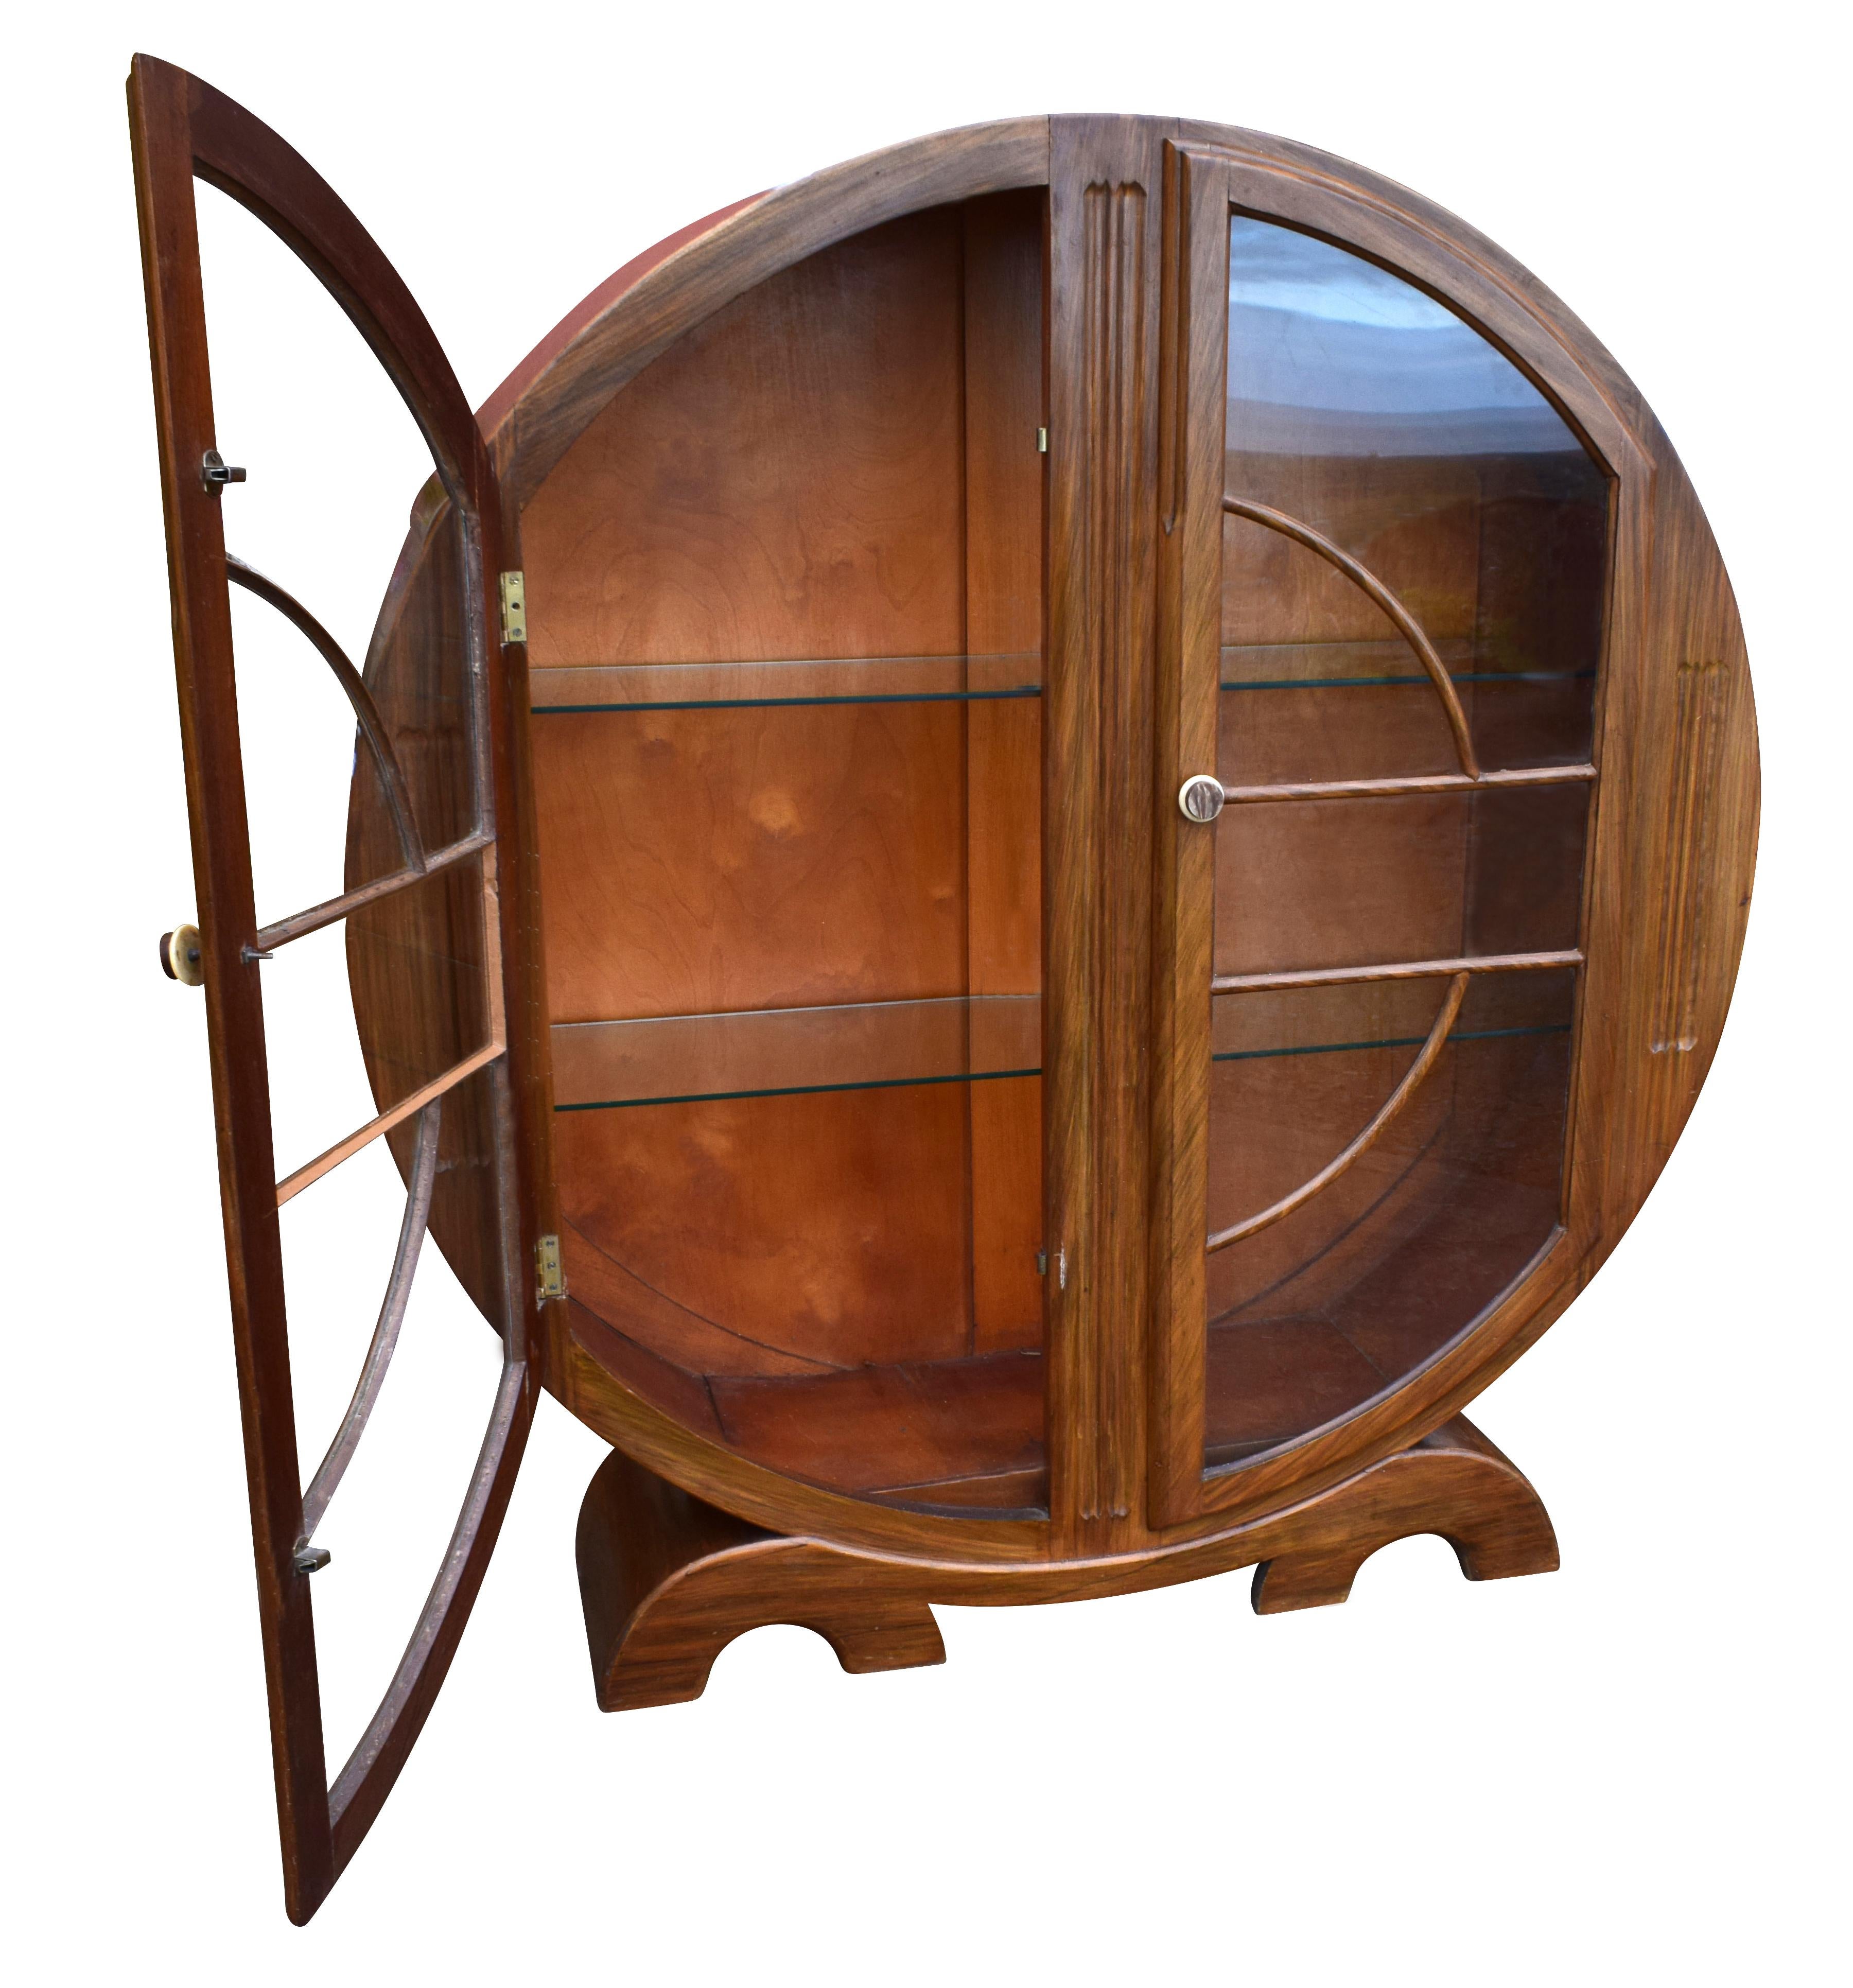 Every Art Deco interior should have one of these lovely 1930s English circular display cabinets. The high quality in beautiful walnut with ample internal storage makes this is a very functional piece. The two internal glass shelves are thick glass